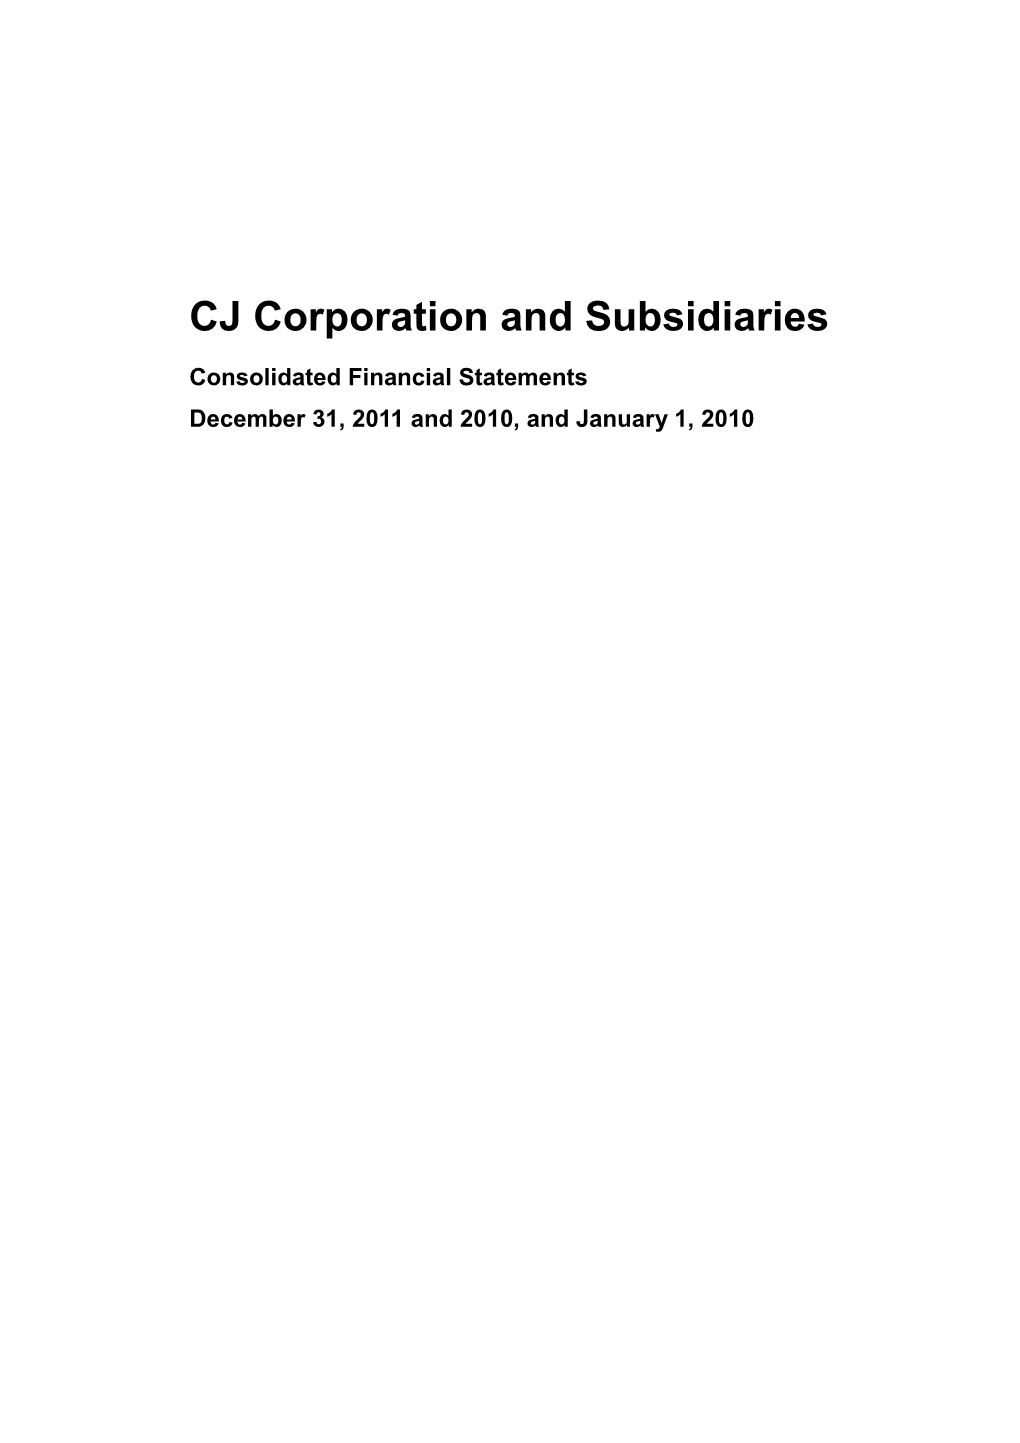 CJ Corporation and Subsidiaries